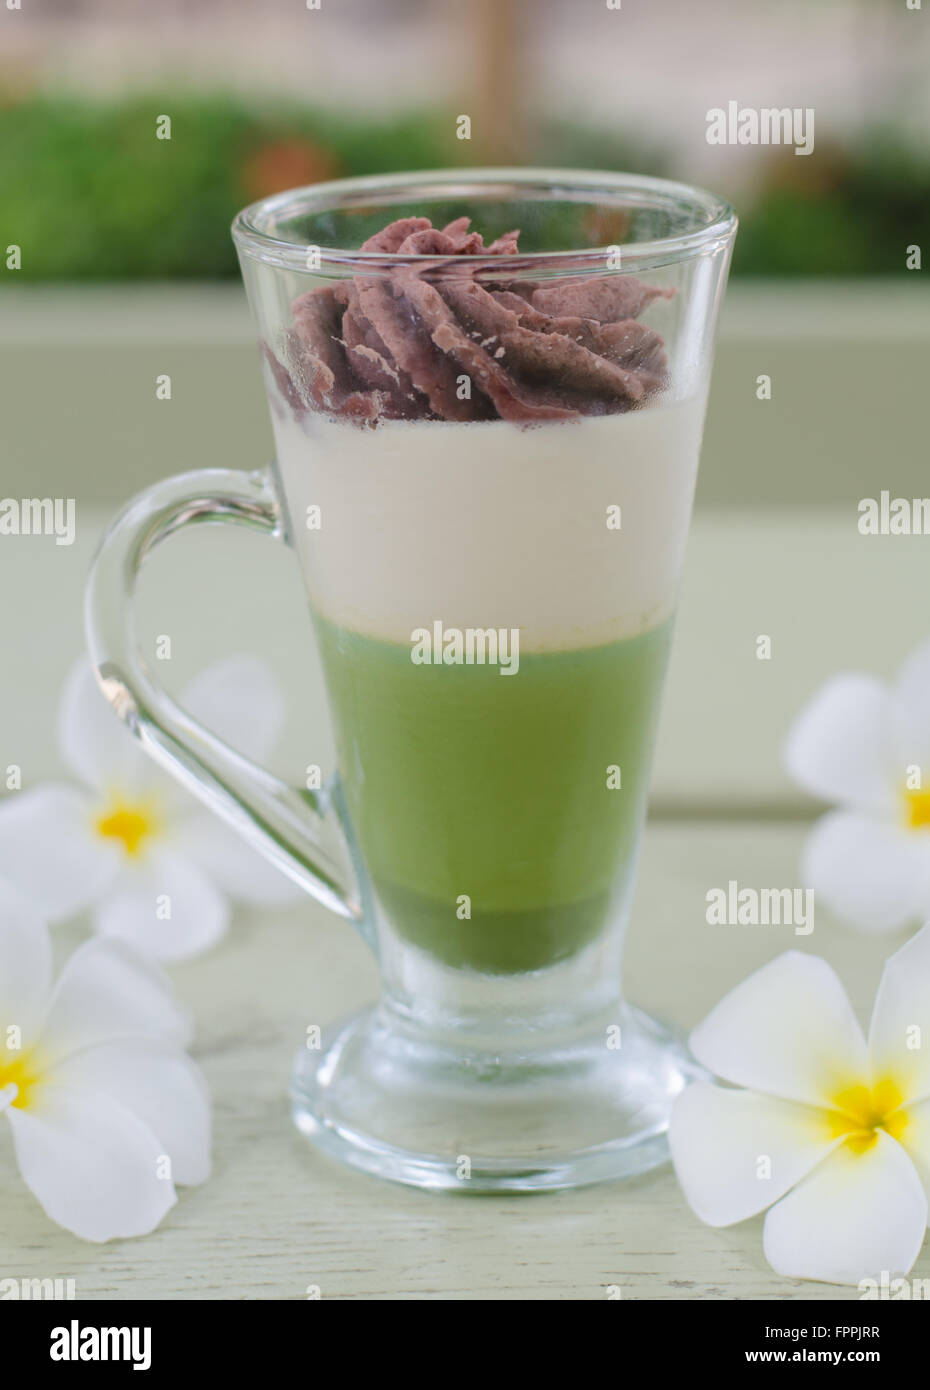 Green tea and red bean pudding in a glass Stock Photo